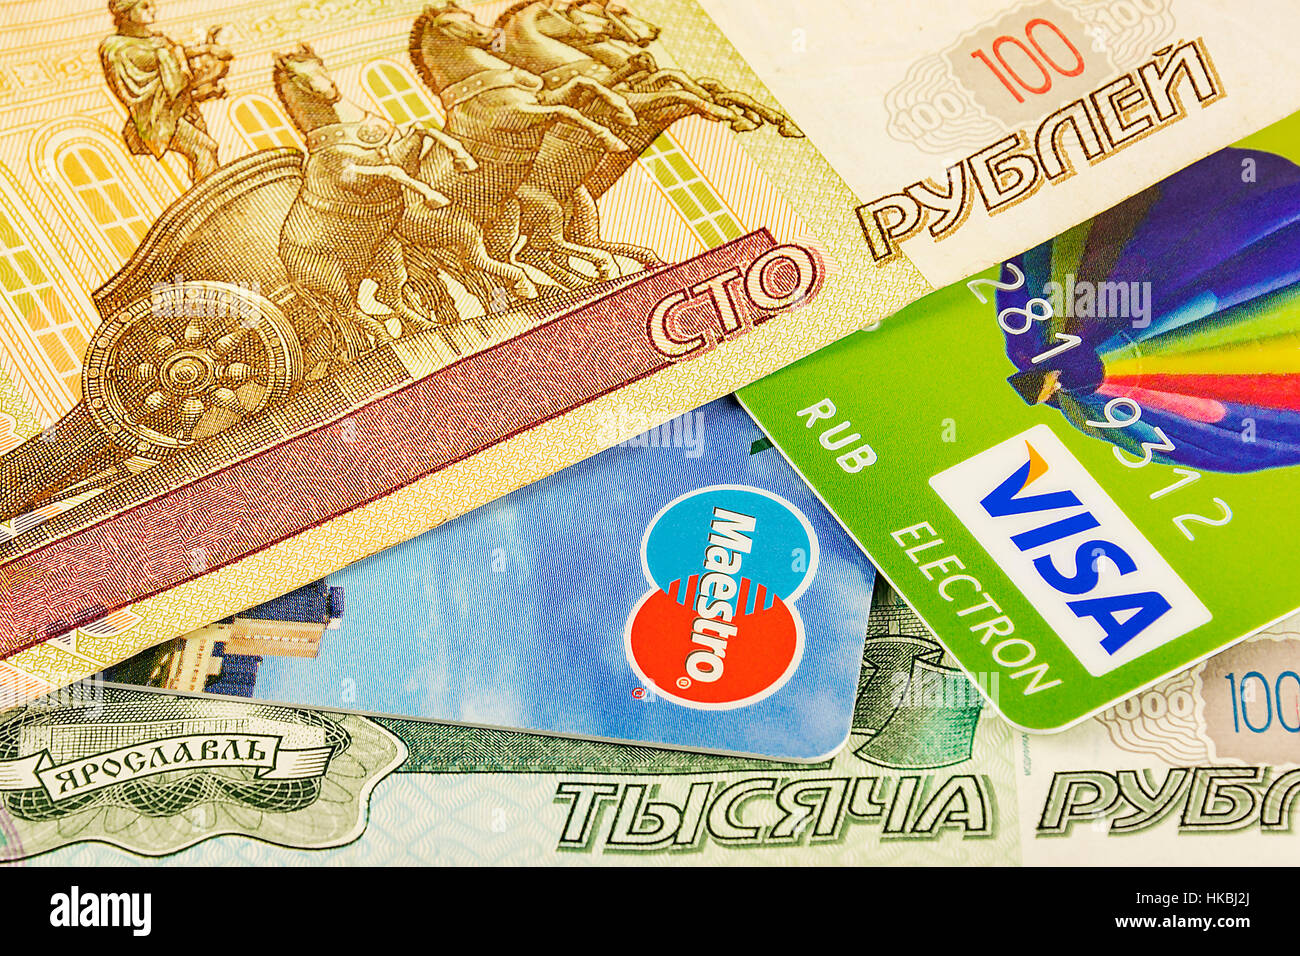 Part of the bank card cashless systems platezhnyhy Visa and Master Card and parts of Russian rubles banknotes Stock Photo